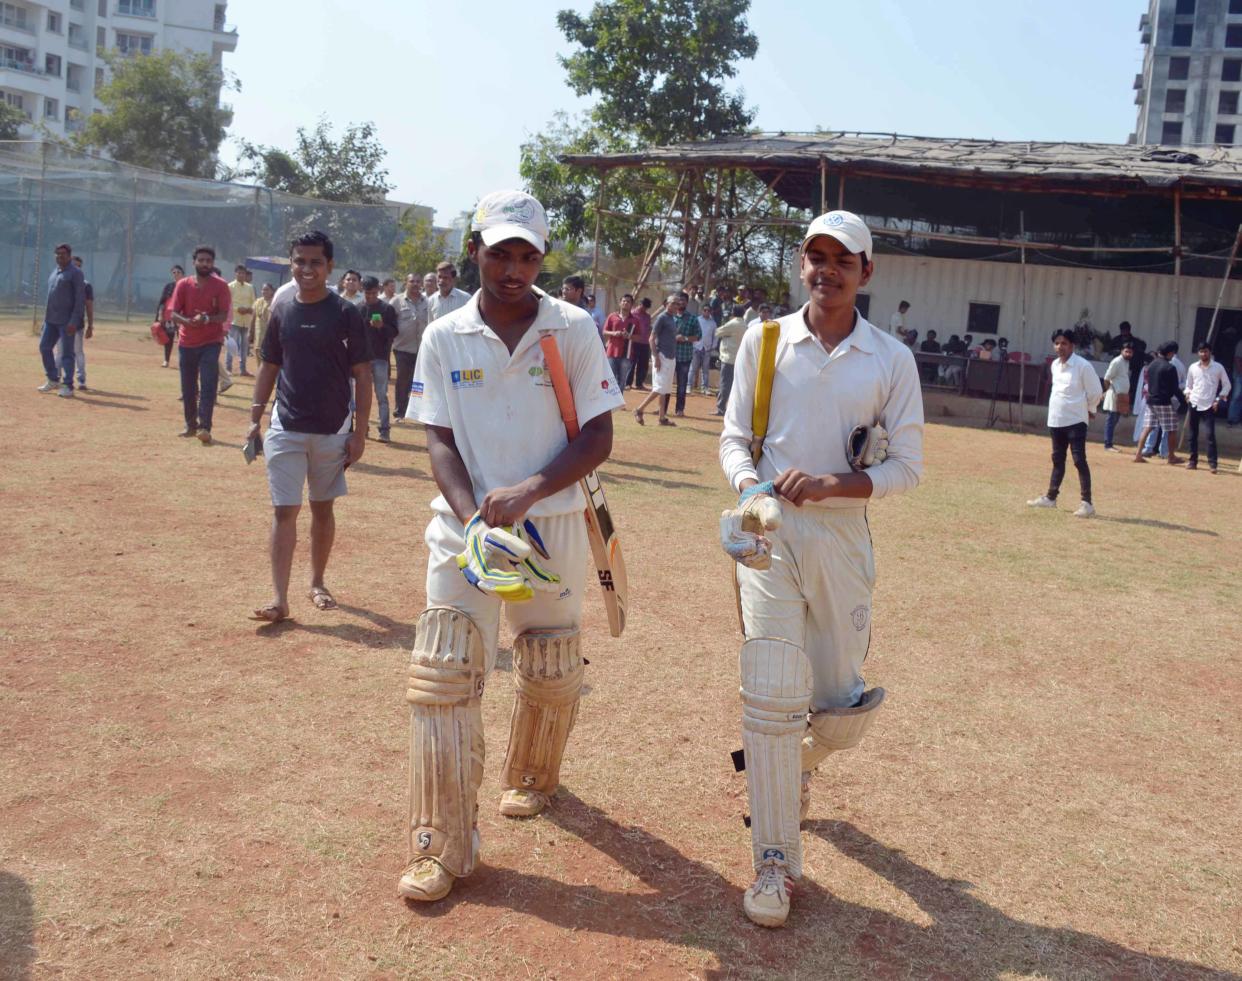 MUMBAI, INDIA - JANUARY 05: Pranav Dhanawade seen at a ground before the cricket match on January 5, 2016 in Mumbai, India. 

Mumbai teenager Pranav Dhanawade, who has broken a century-old cricketing record on Monday, became the first batsman to score 1000-plus runs in an innings in any form of cricket. Batting against Arya Gurukul School in a Bhandari Cup match, Pranav reached 1000 runs in just 323 balls on Tuesday. The tournament is an under-16 inter-school event organised by the Mumbai Cricket Association (MCA) mainly for the benefit of suburban schools.

PHOTOGRAPH BY Barcroft India

UK Office, London.
T +44 845 370 2233
W www.barcroftmedia.com

USA Office, New York City.
T +1 212 796 2458
W www.barcroftusa.com

Indian Office, Delhi.
T +91 11 4053 2429
W www.barcroftindia.com (Photo credit should read Barcroft India / Barcroft Media via Getty Images)